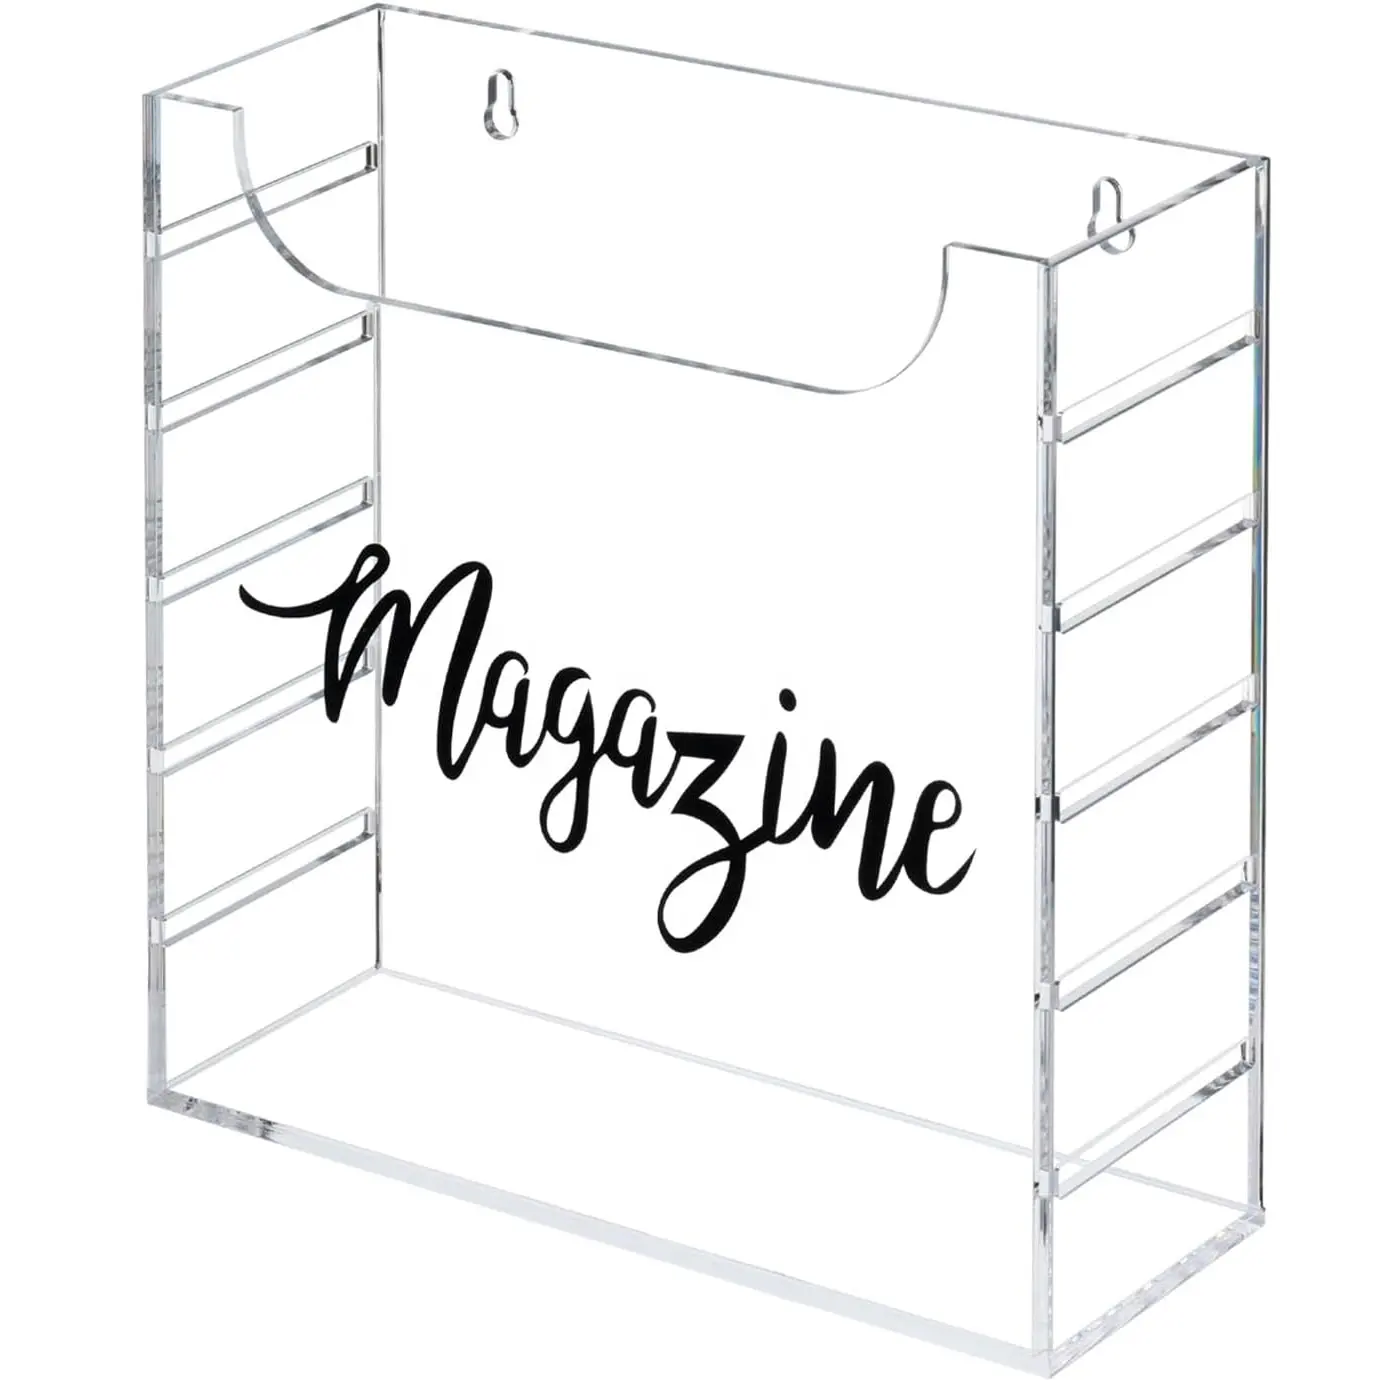 Clear Acrylic Magazine Holder with Decor Black Cursive Lettering Magazine Label Modern Wall Mounted Storage Box for Magazines